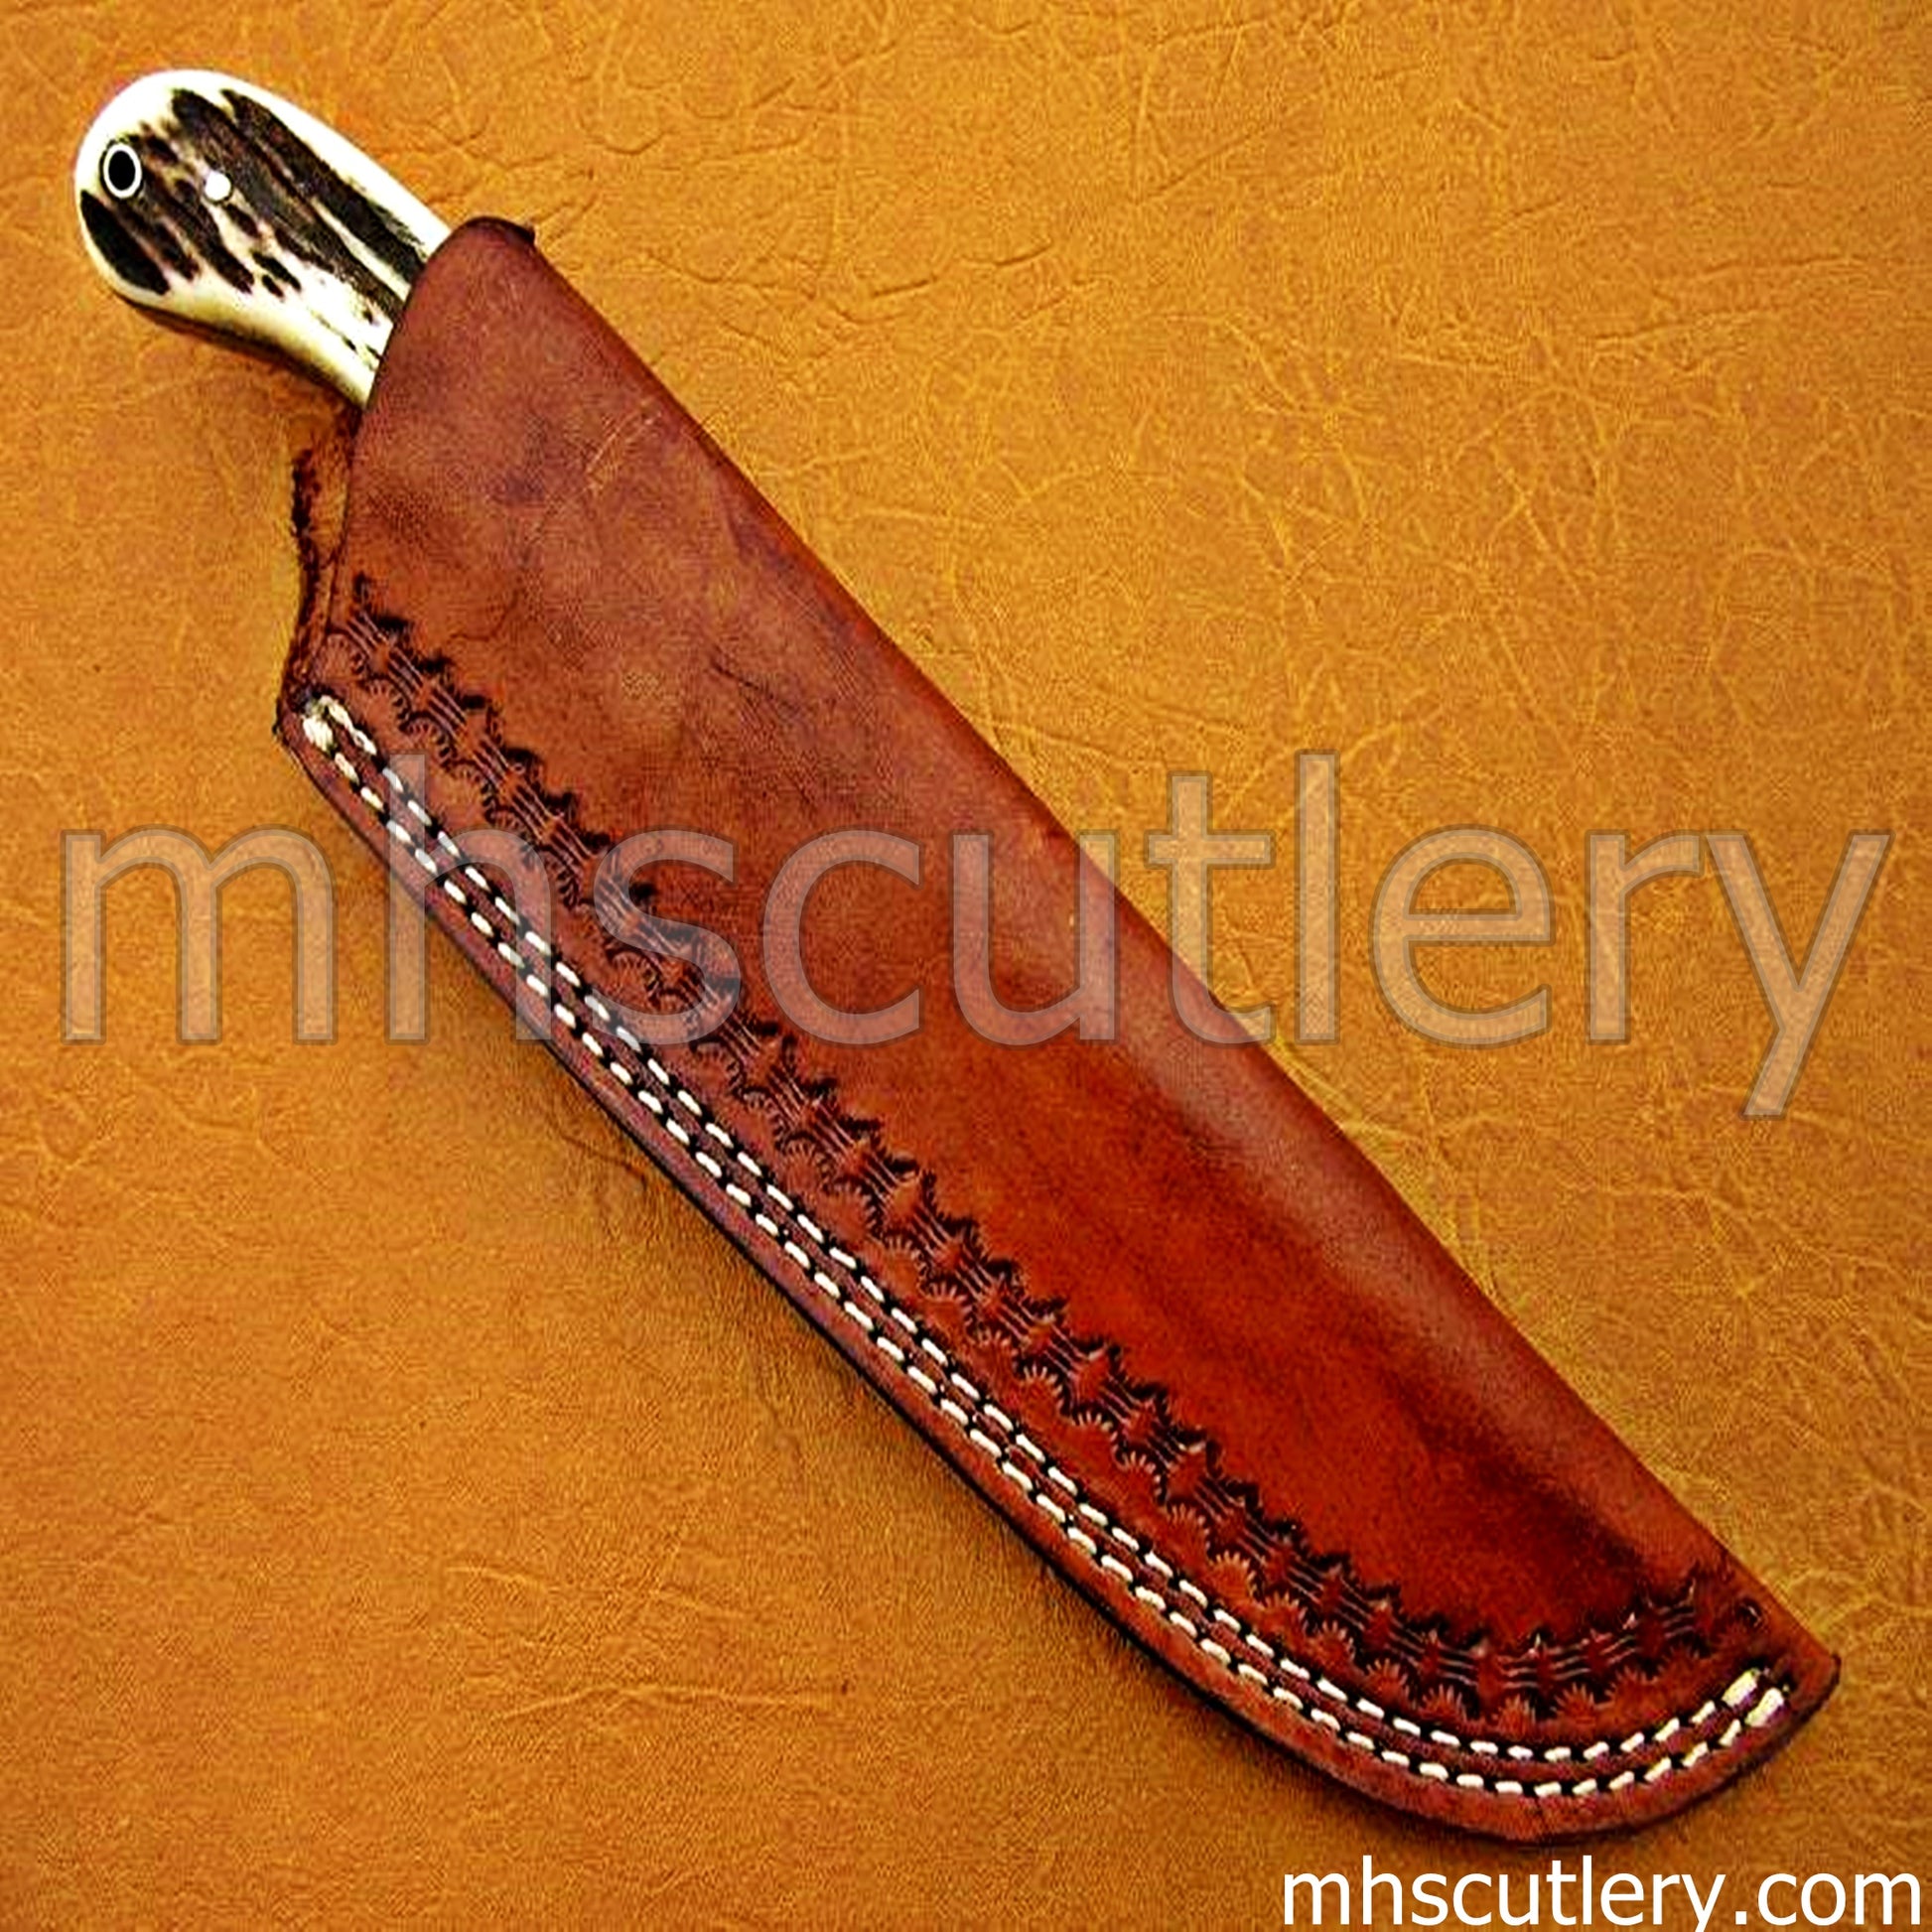 Handmade Ladder Damascus Steel Tactical Hunting Knife / Stag Handle | mhscutlery